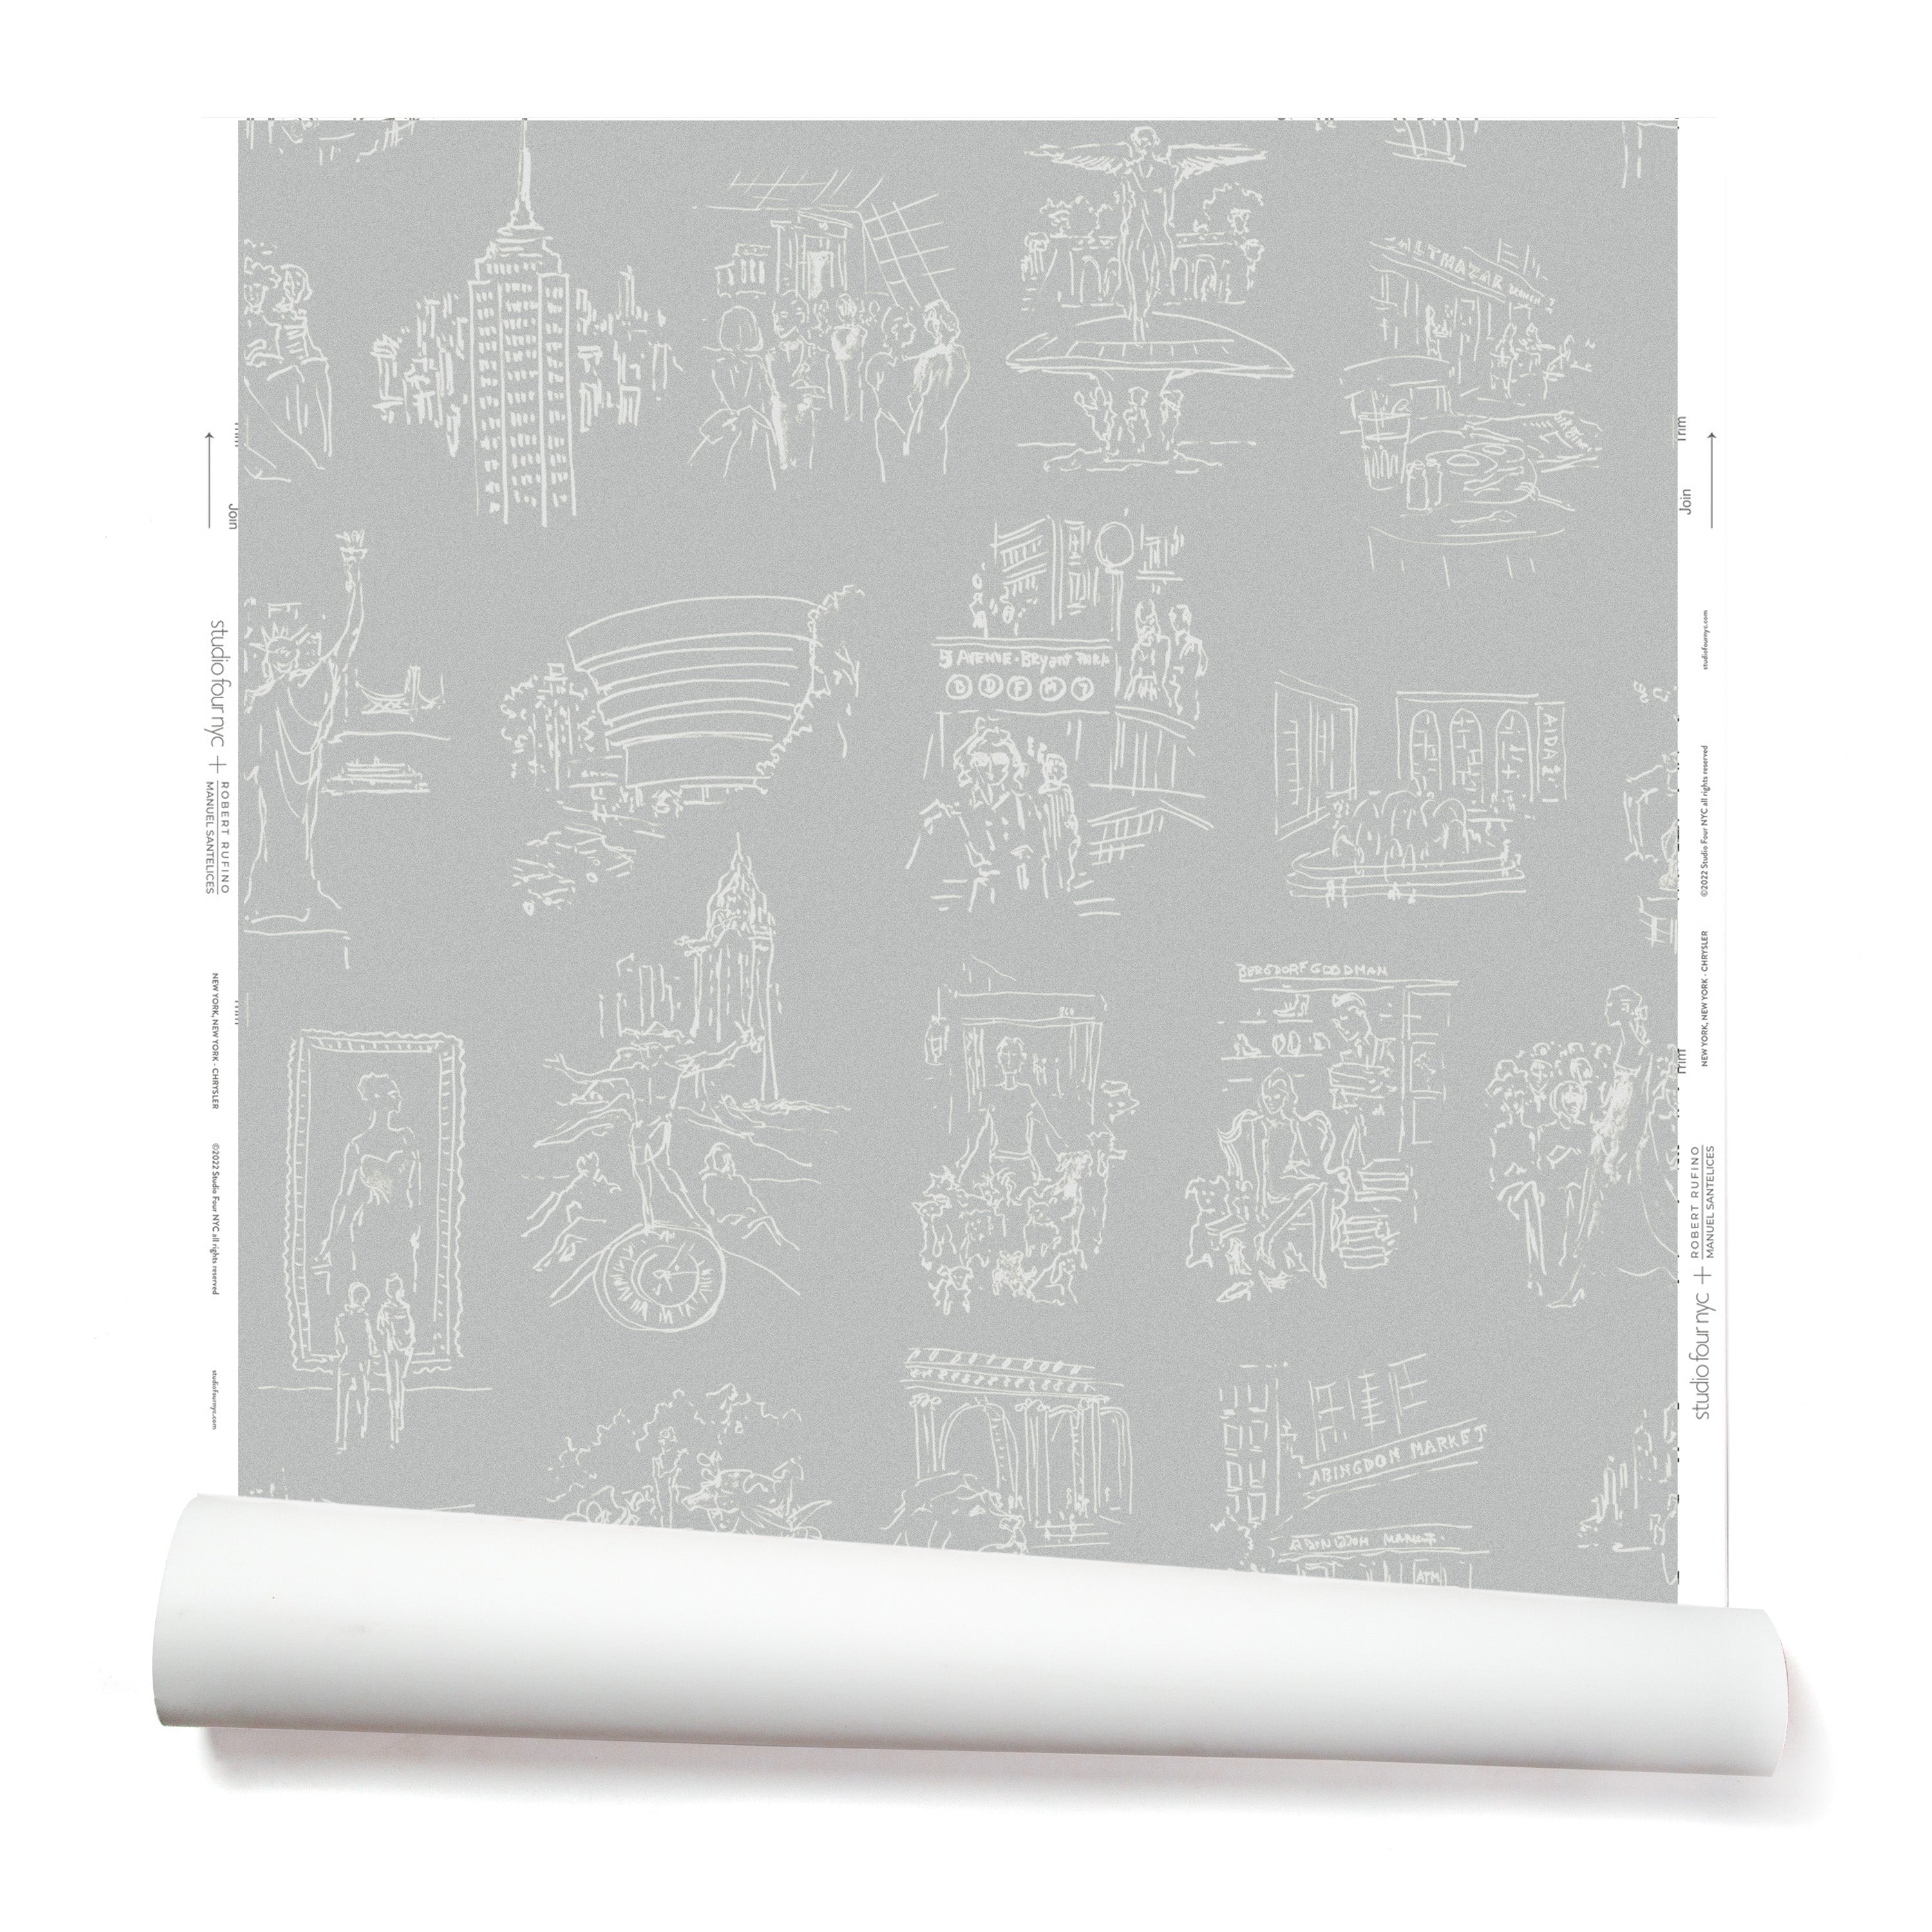 Partially unrolled wallpaper with white hand-drawn illustrations of New York City landmarks on a gray background.